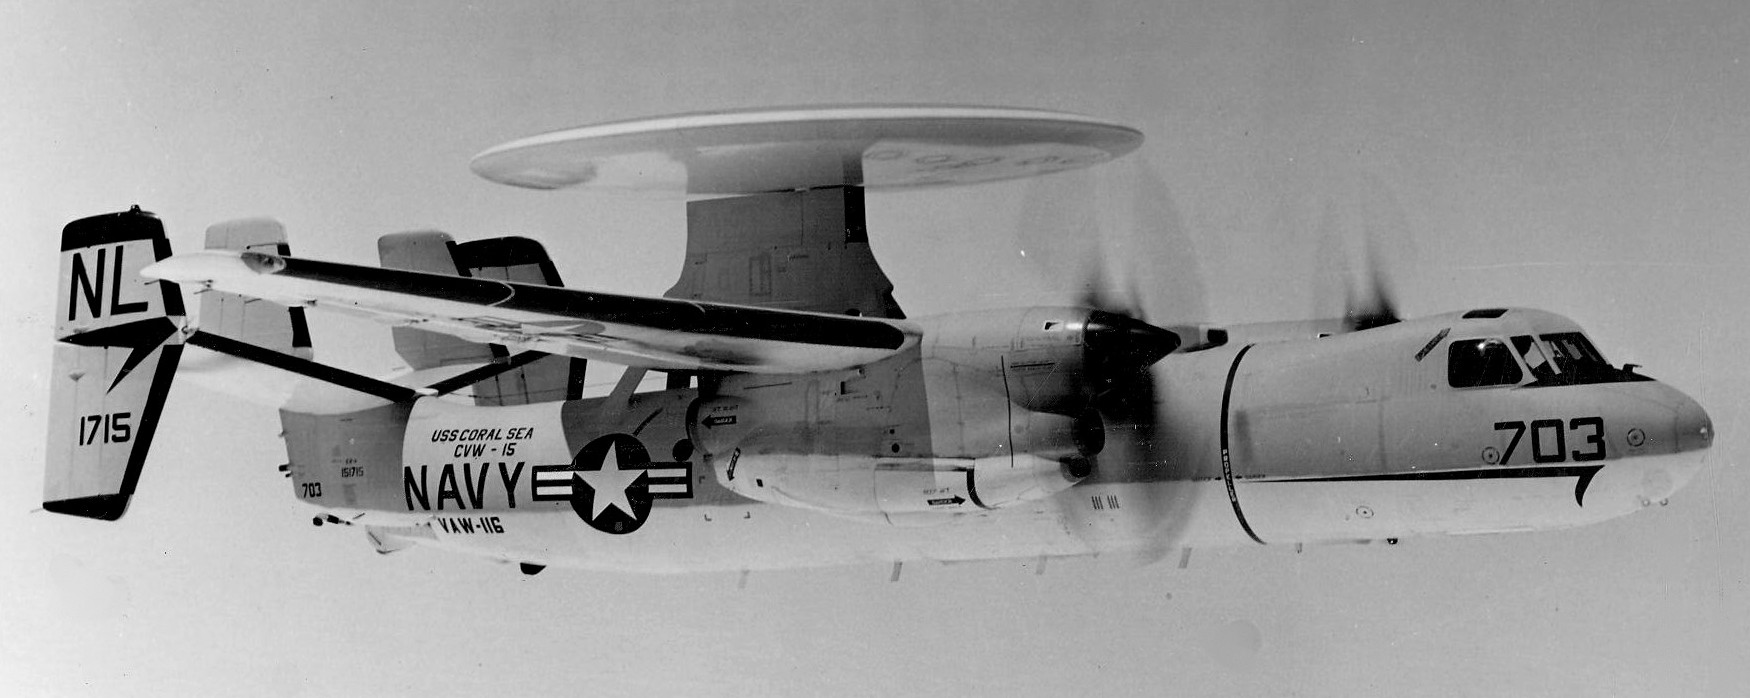 vaw-116 sun kings airborne command control squadron carrier early warning cvw-15 uss coral sea cva-43 02